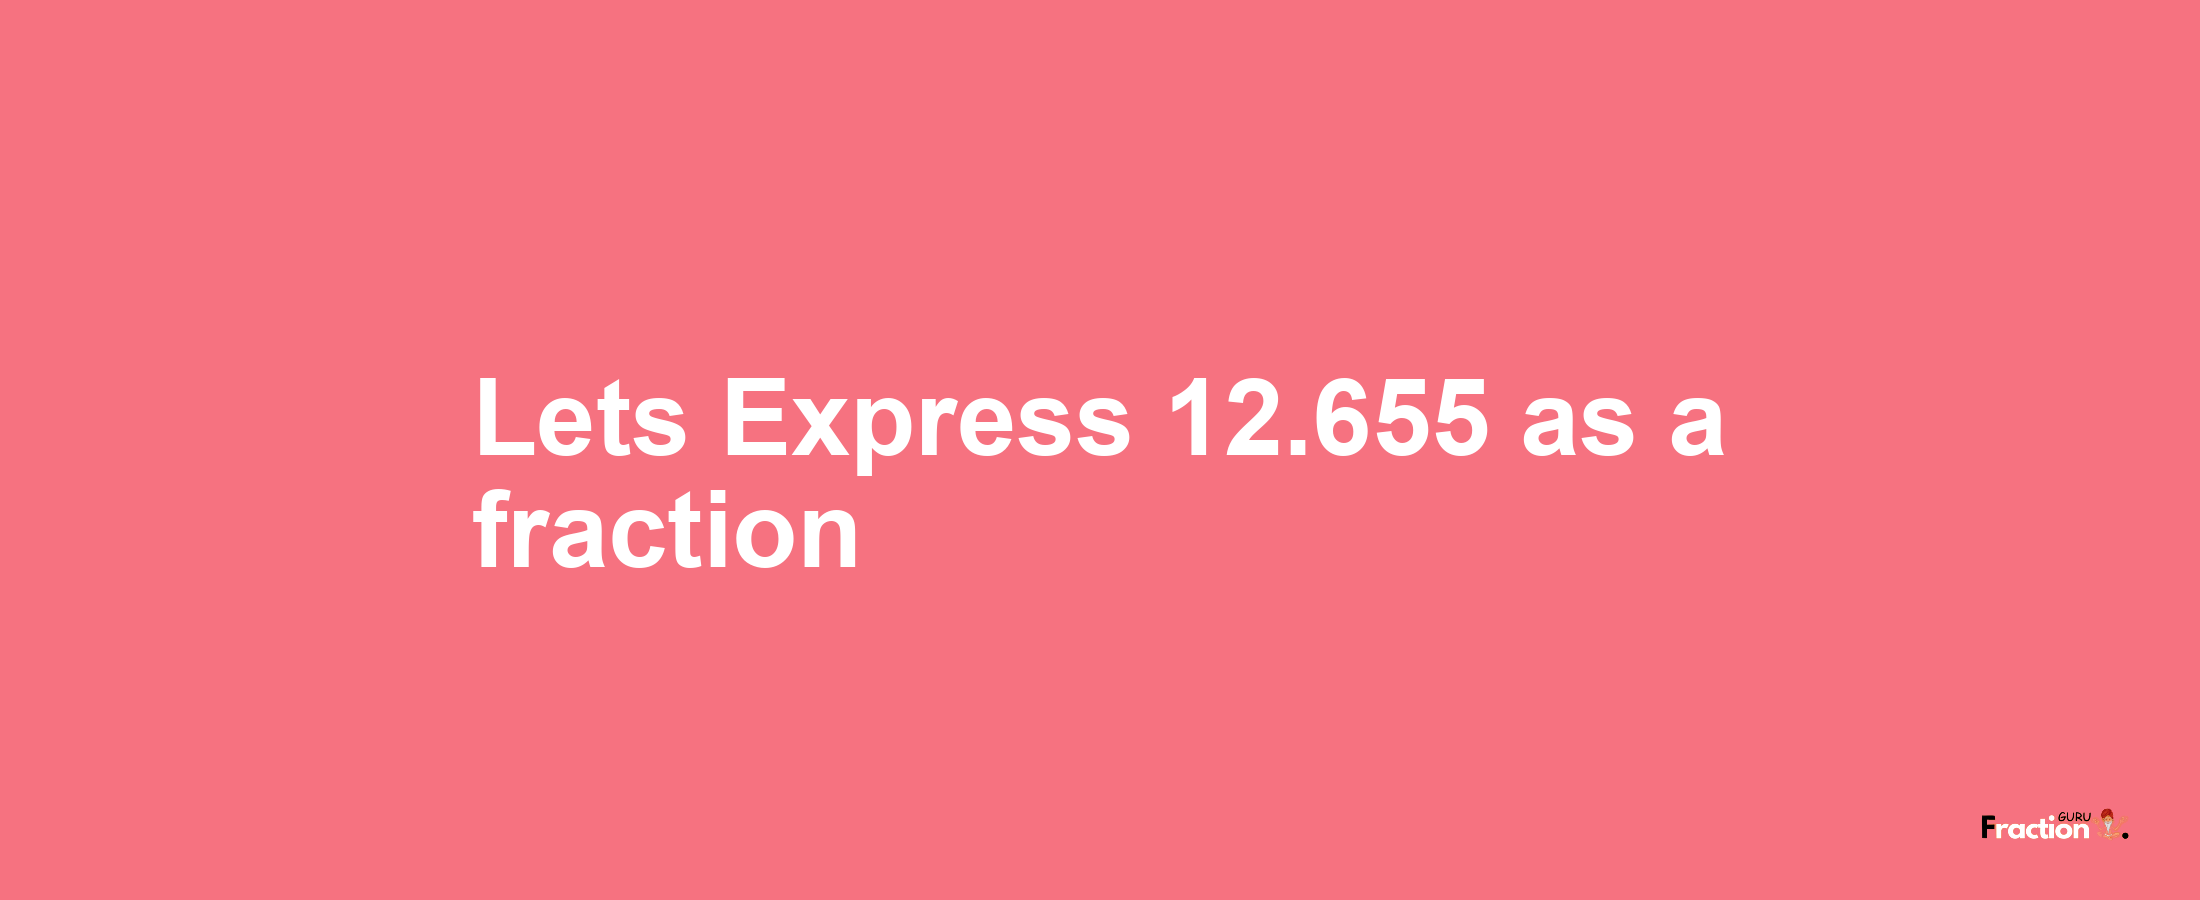 Lets Express 12.655 as afraction